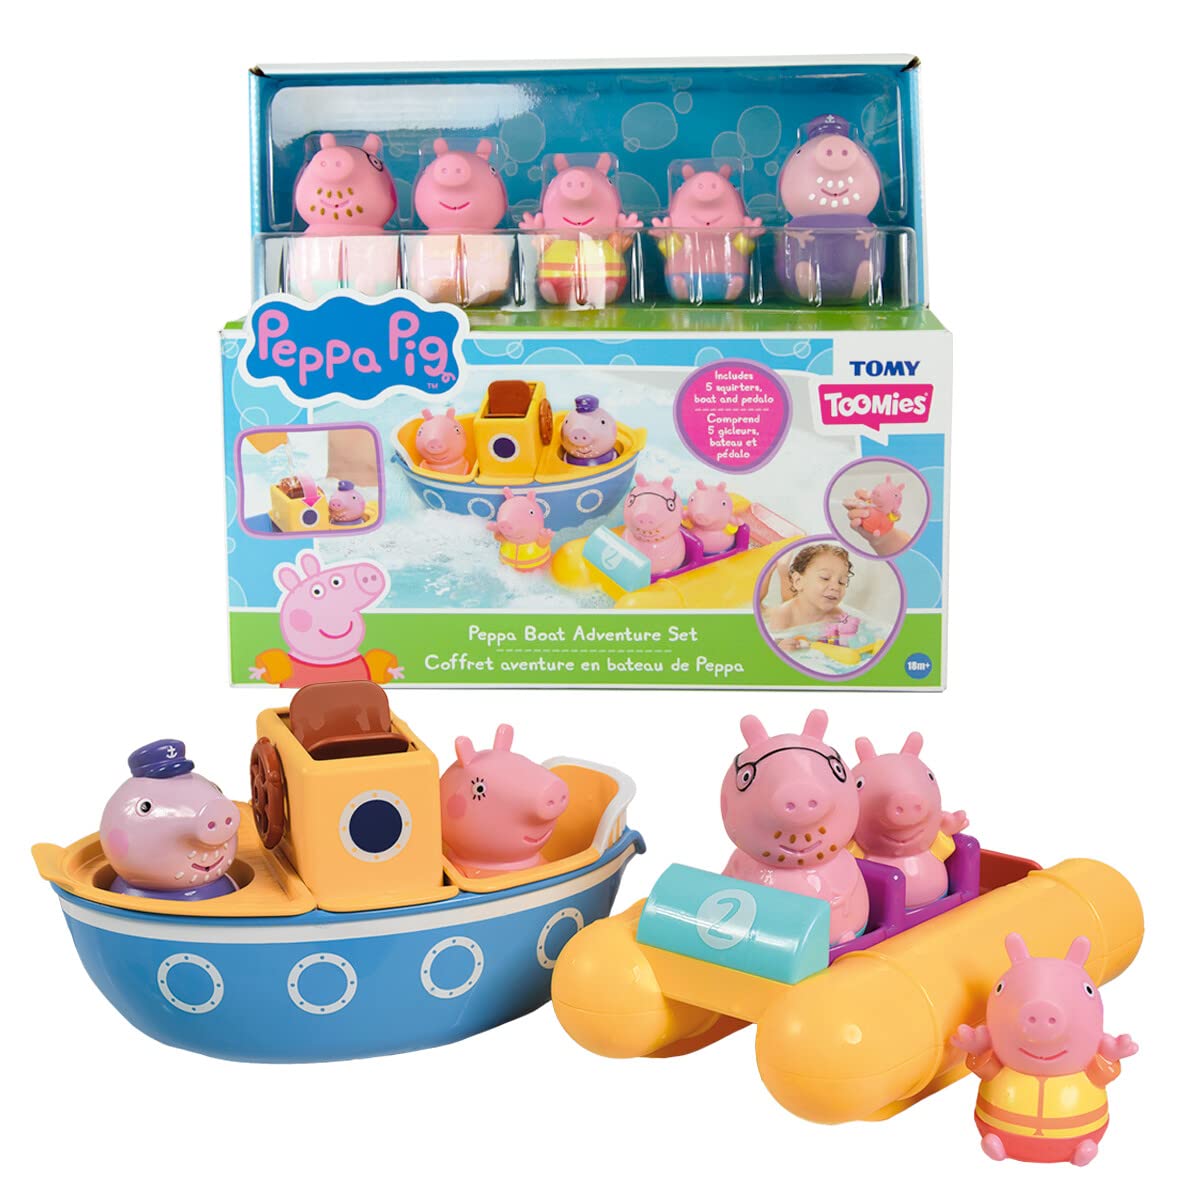 Toomies Tomy Peppa Pig Bath Toys - PeppaAs Boat Adventure Bath Toy Set - Includes Two Boats and 5 Peppa Pig Toy Figures - Baby a